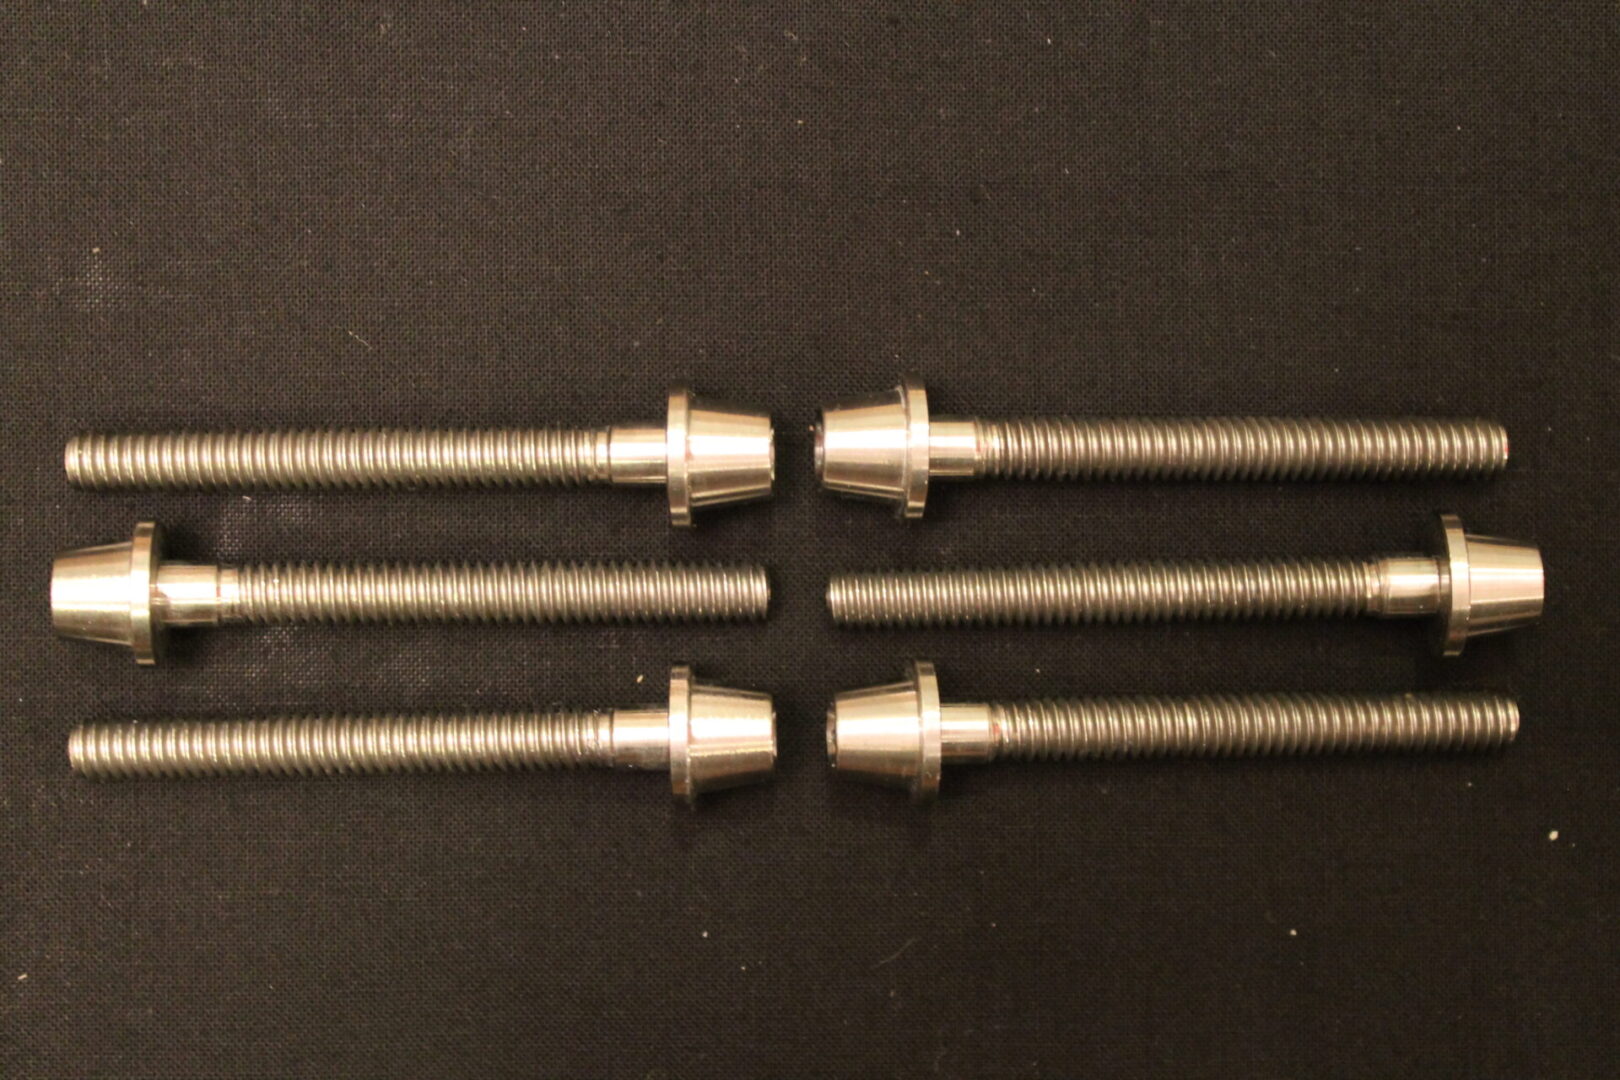 Six Bolts on a Dark Color Background